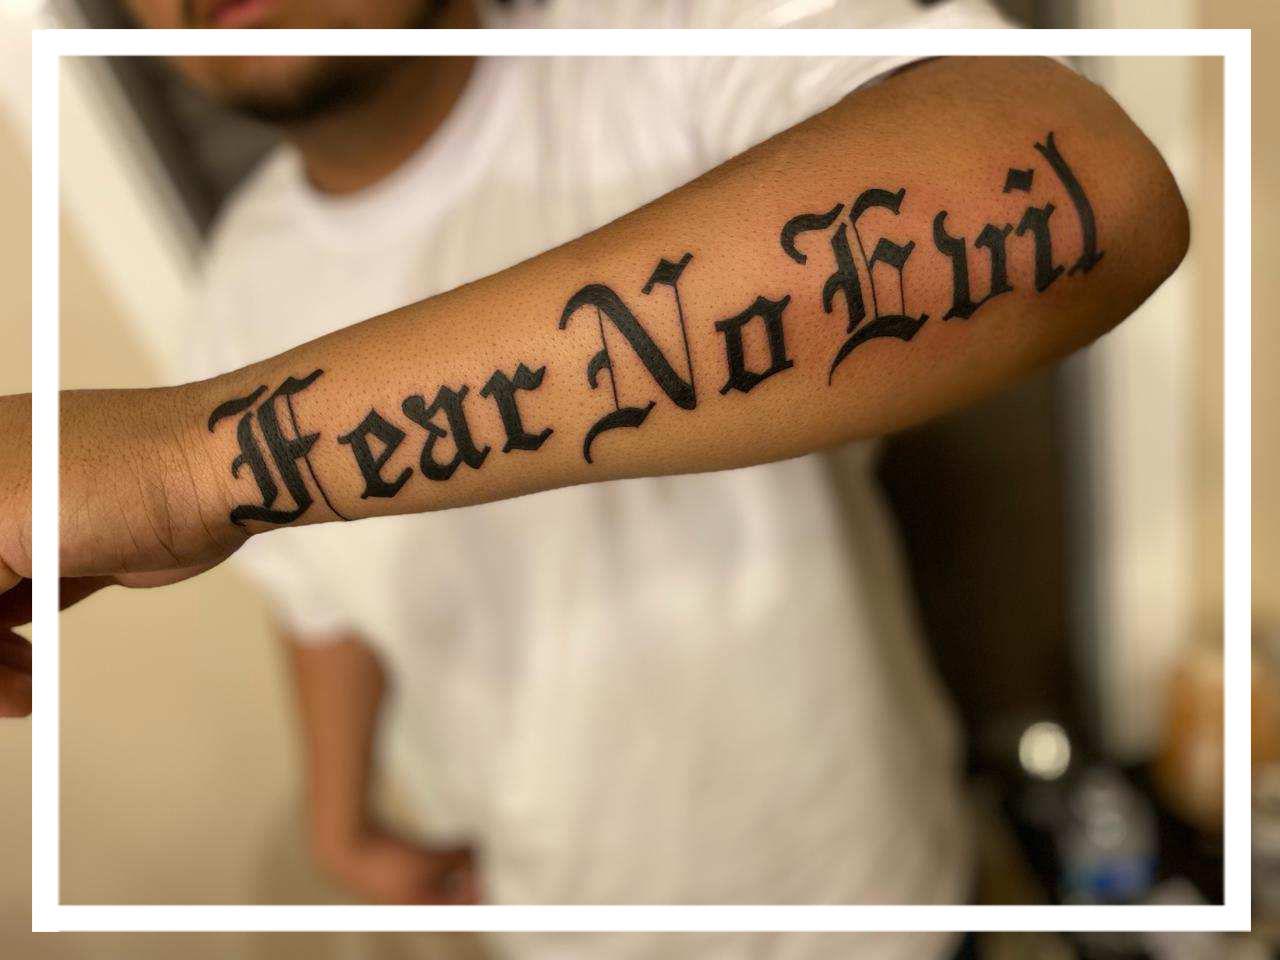 old english font tattoo on arm